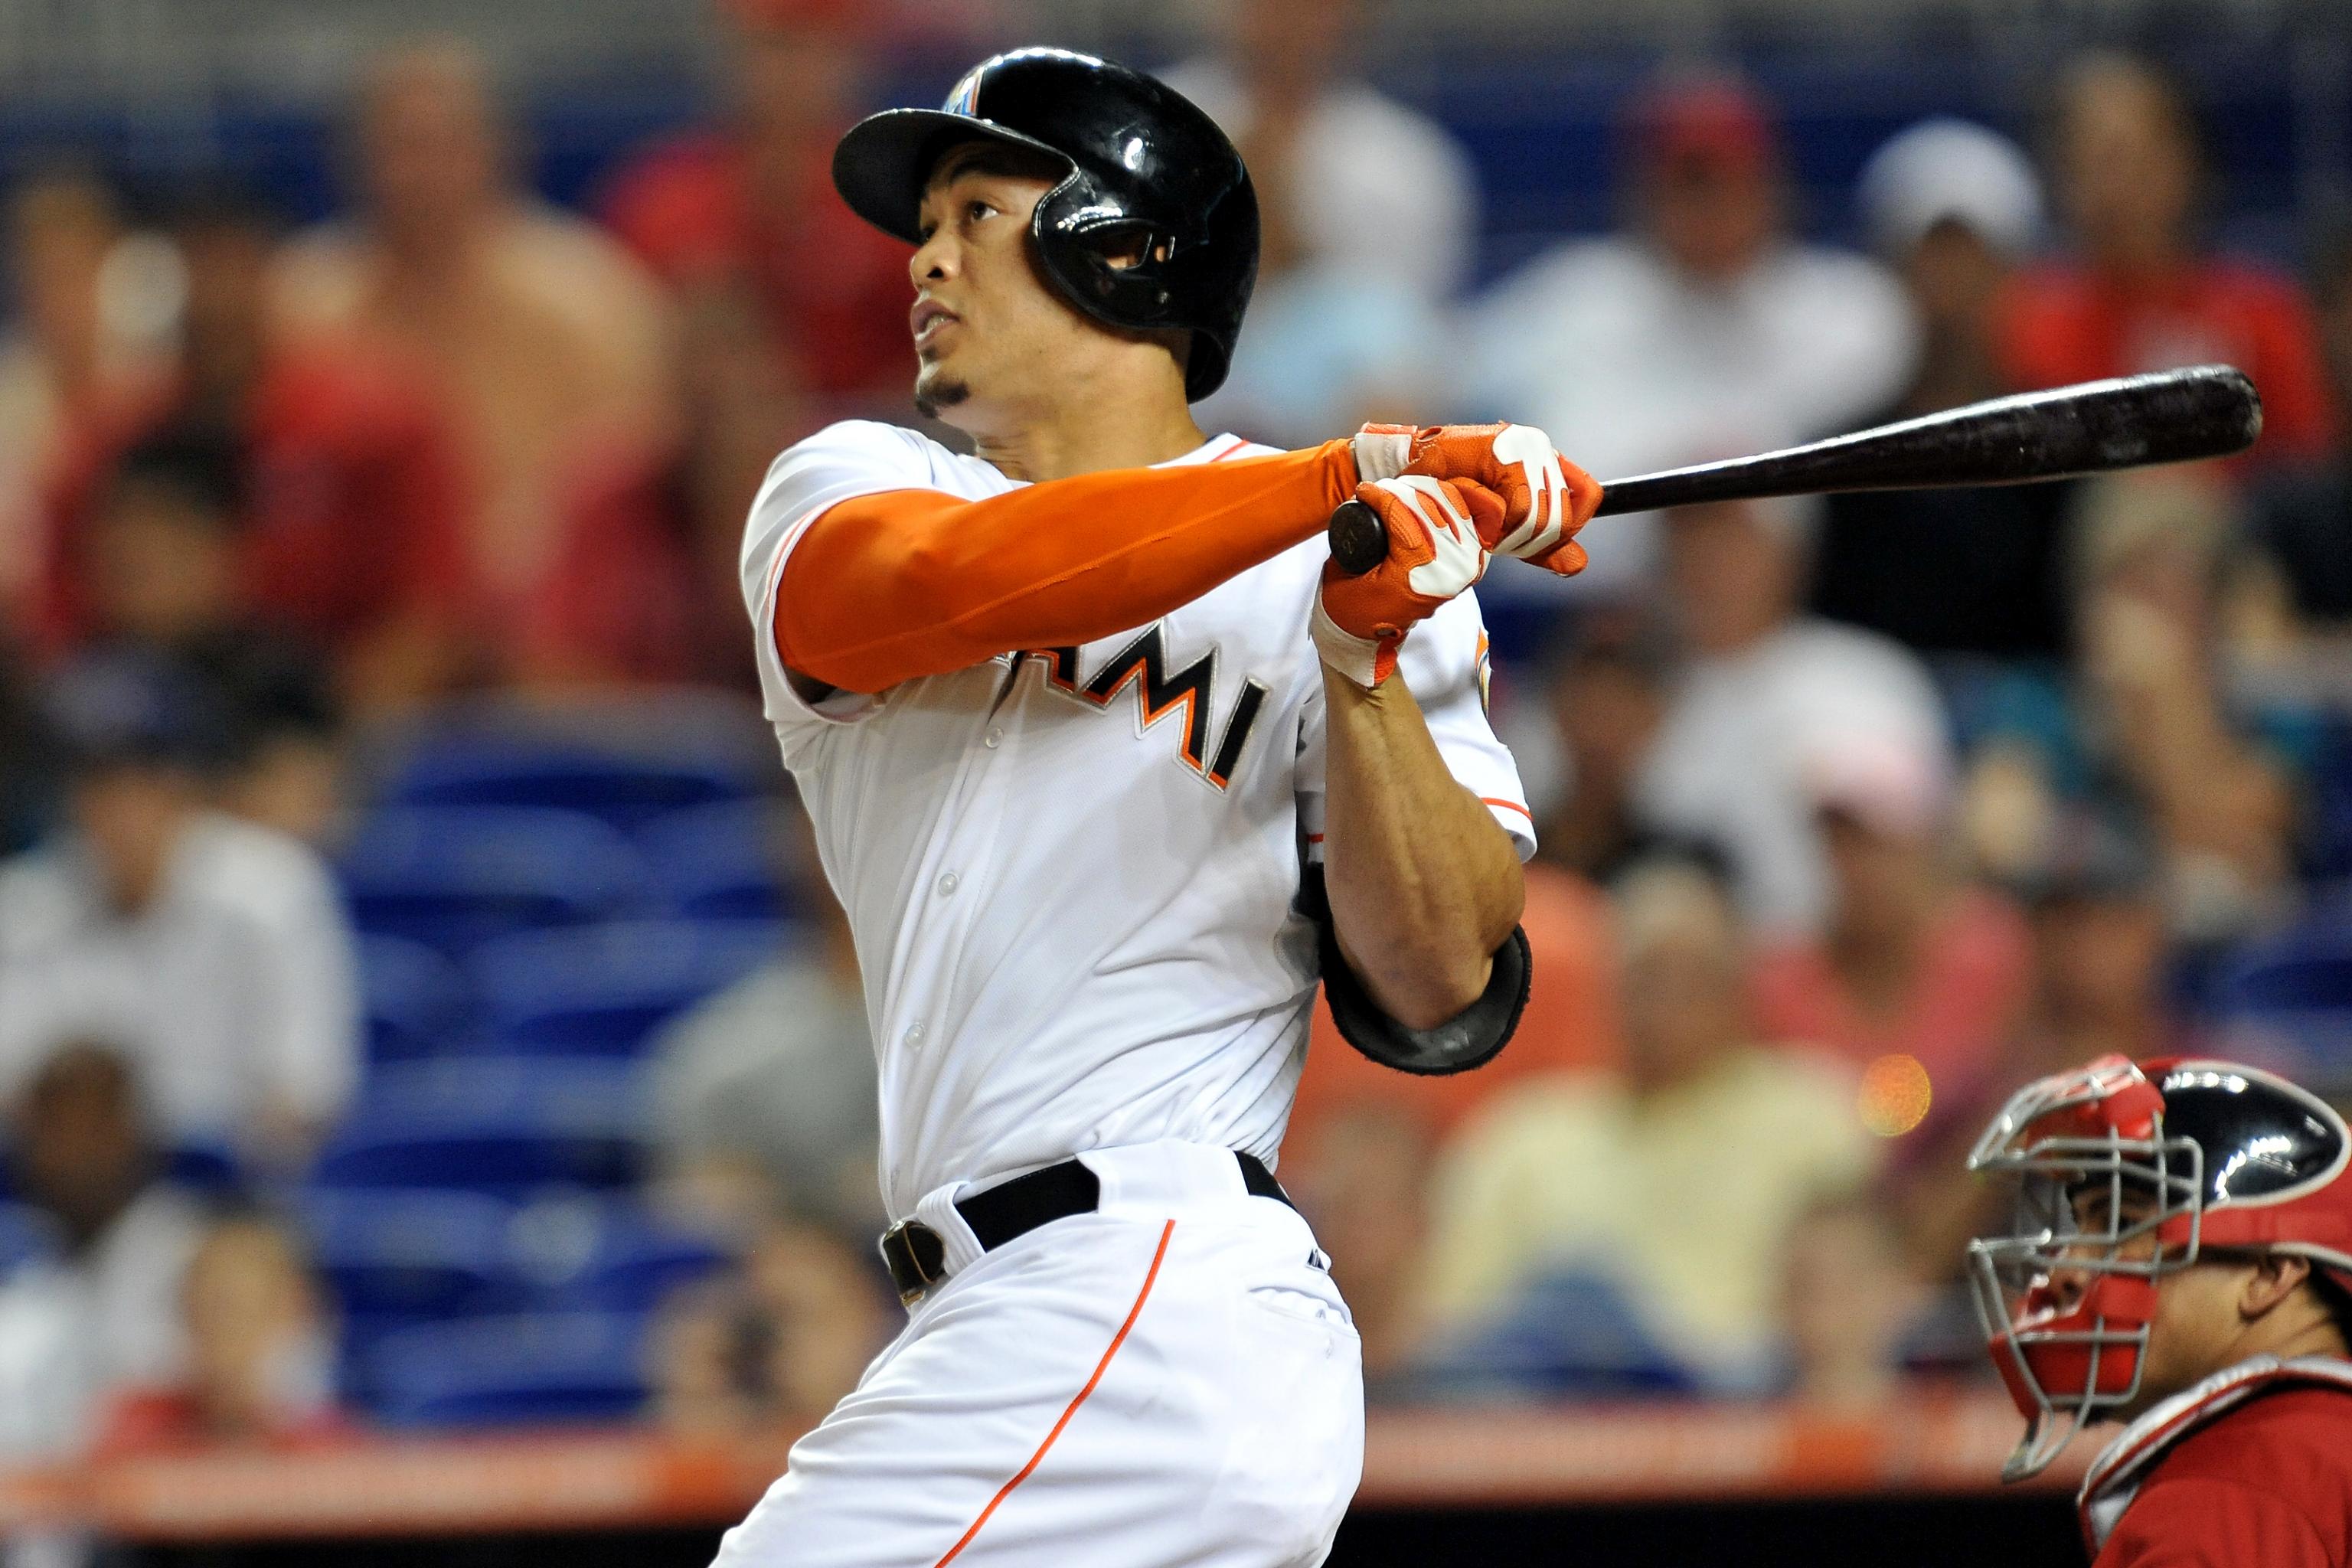 Fish Bites: Another Rumor About Miami Marlins' Giancarlo Stanton